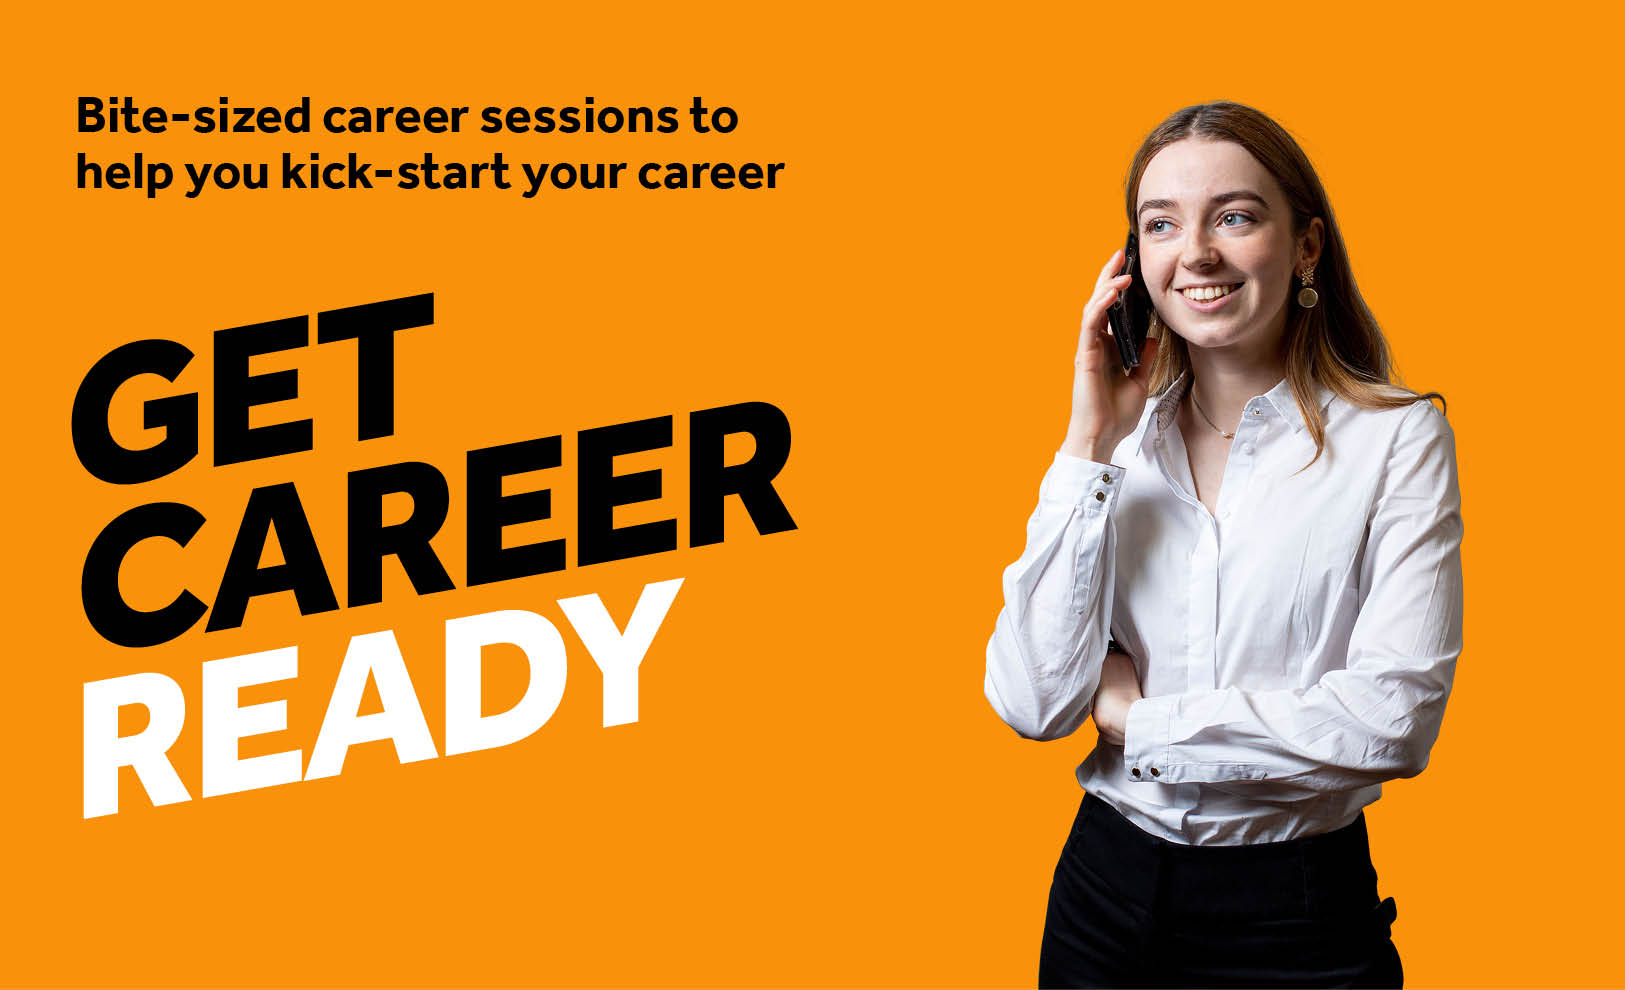 Orange background with image of a girl on the phone. Text reads Get Career Ready / Bite-sized career sessions to help you kick-start your career